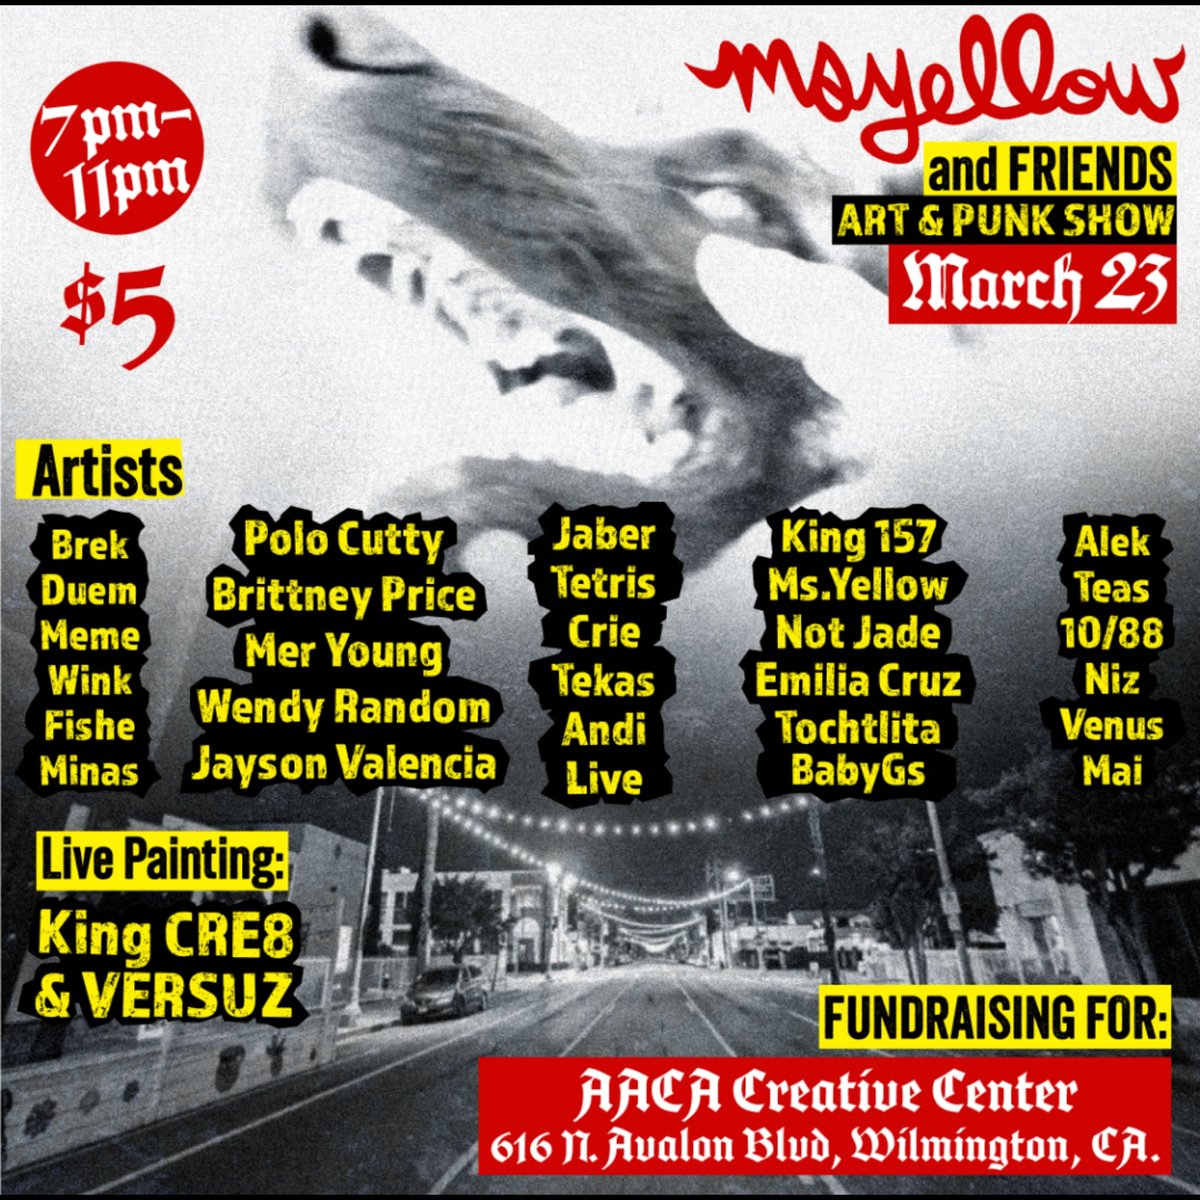 MARCH 23, Art & Music Fundraiser Show for the Creative Center ✨  616 N. Avalon Blvd, Wilmington, Ca 7pm-11pm, $5 ___________________ Punk bands TBA! Art/ Live Painting/ Tattoos/ Music/ Vendors ___________________ 100% of the proceeds will be going back into the Center